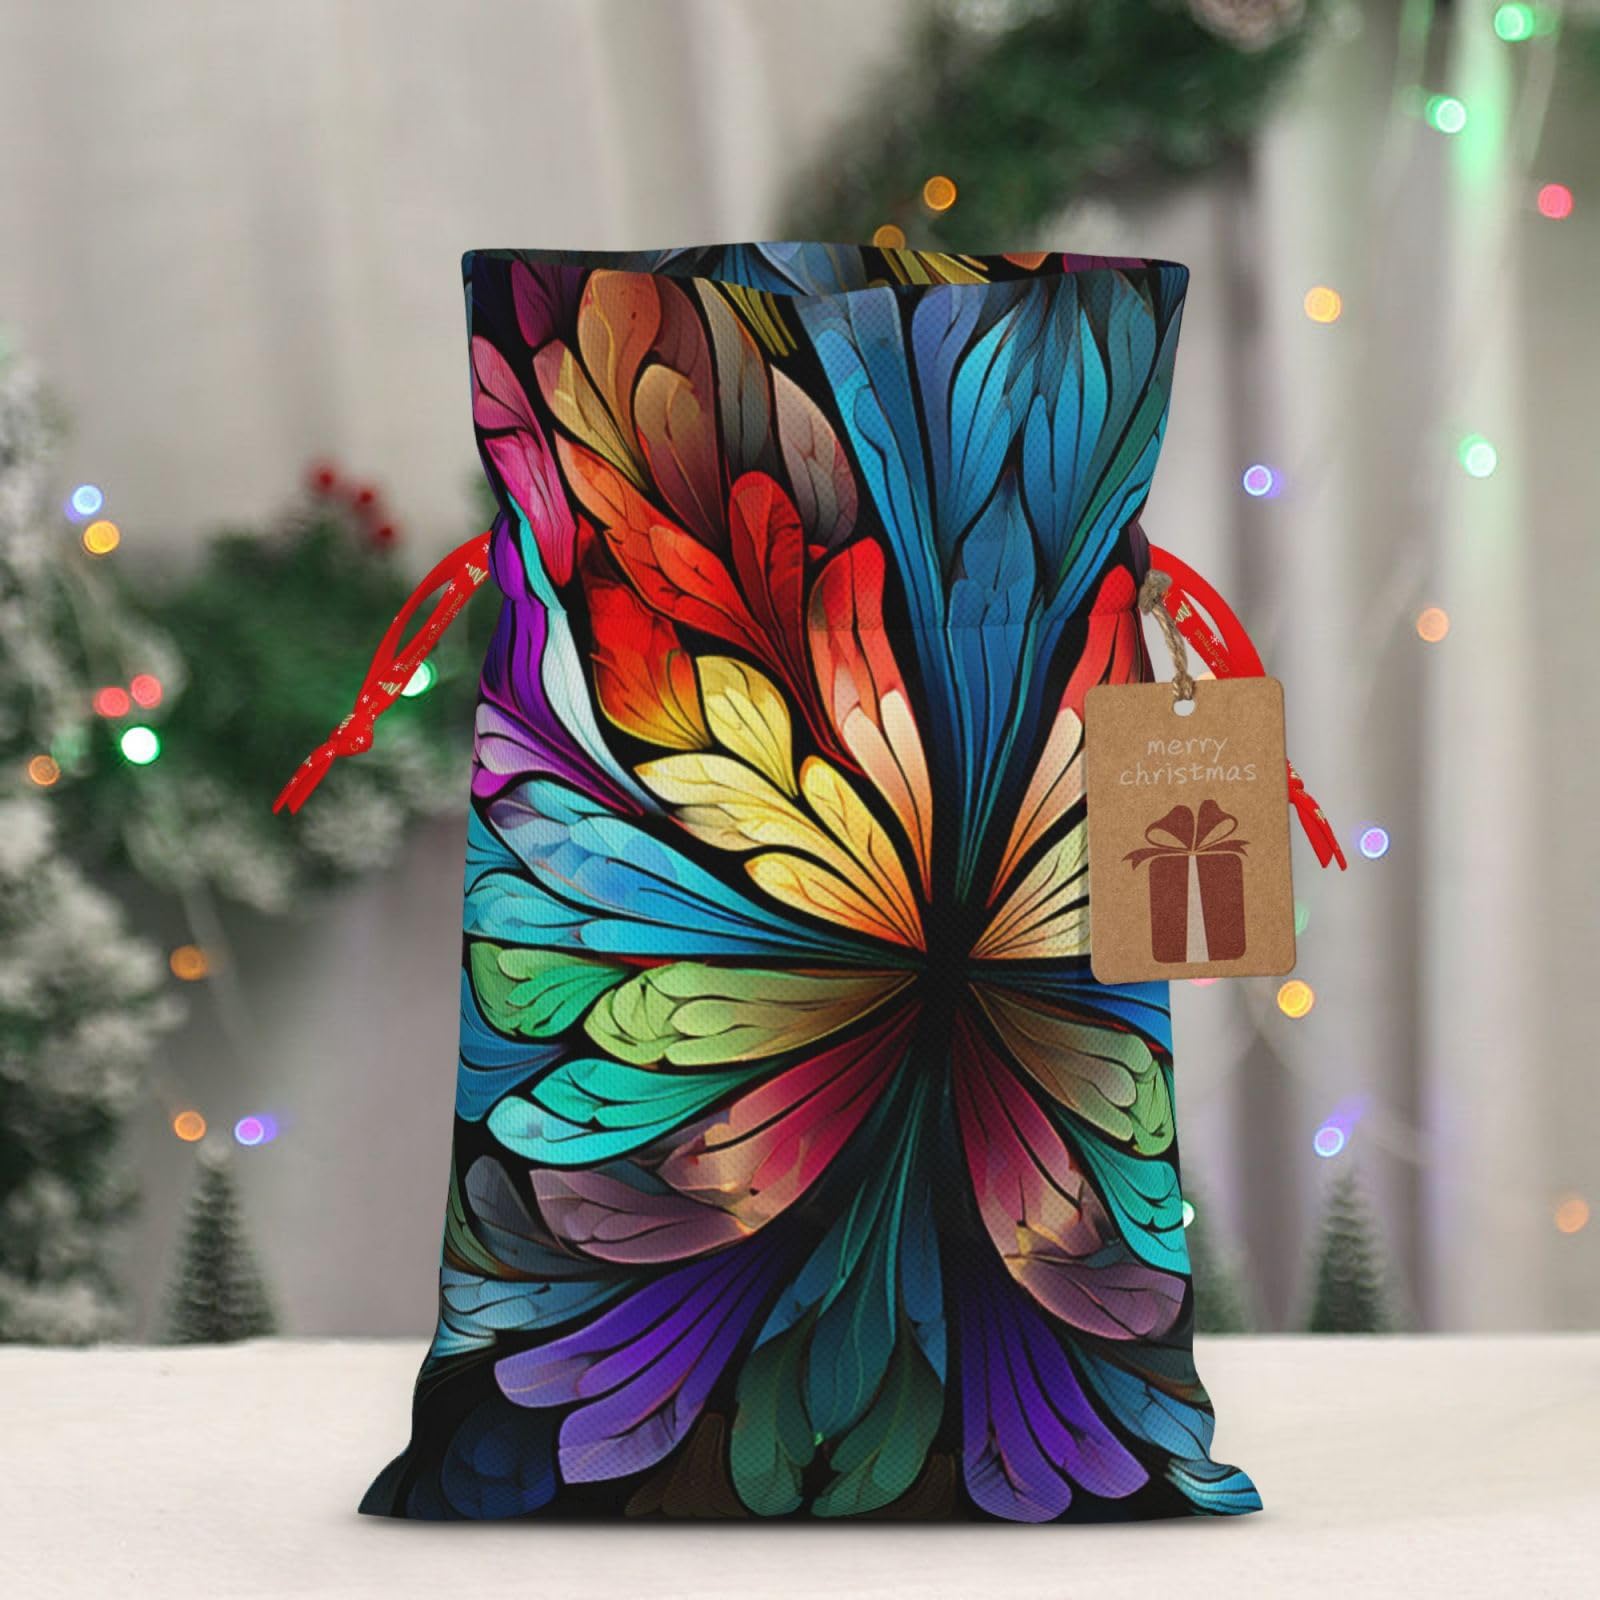 BTCOWZRV Rainbow Butterfly Christmas Gift Bag with Drawstring Christmas Wrapping Bags Xmas Gift Bags Sack Bags Xmas Package Storage Bag Wrapping Sacks Pouches Xmas Party Holiday Gift Bags